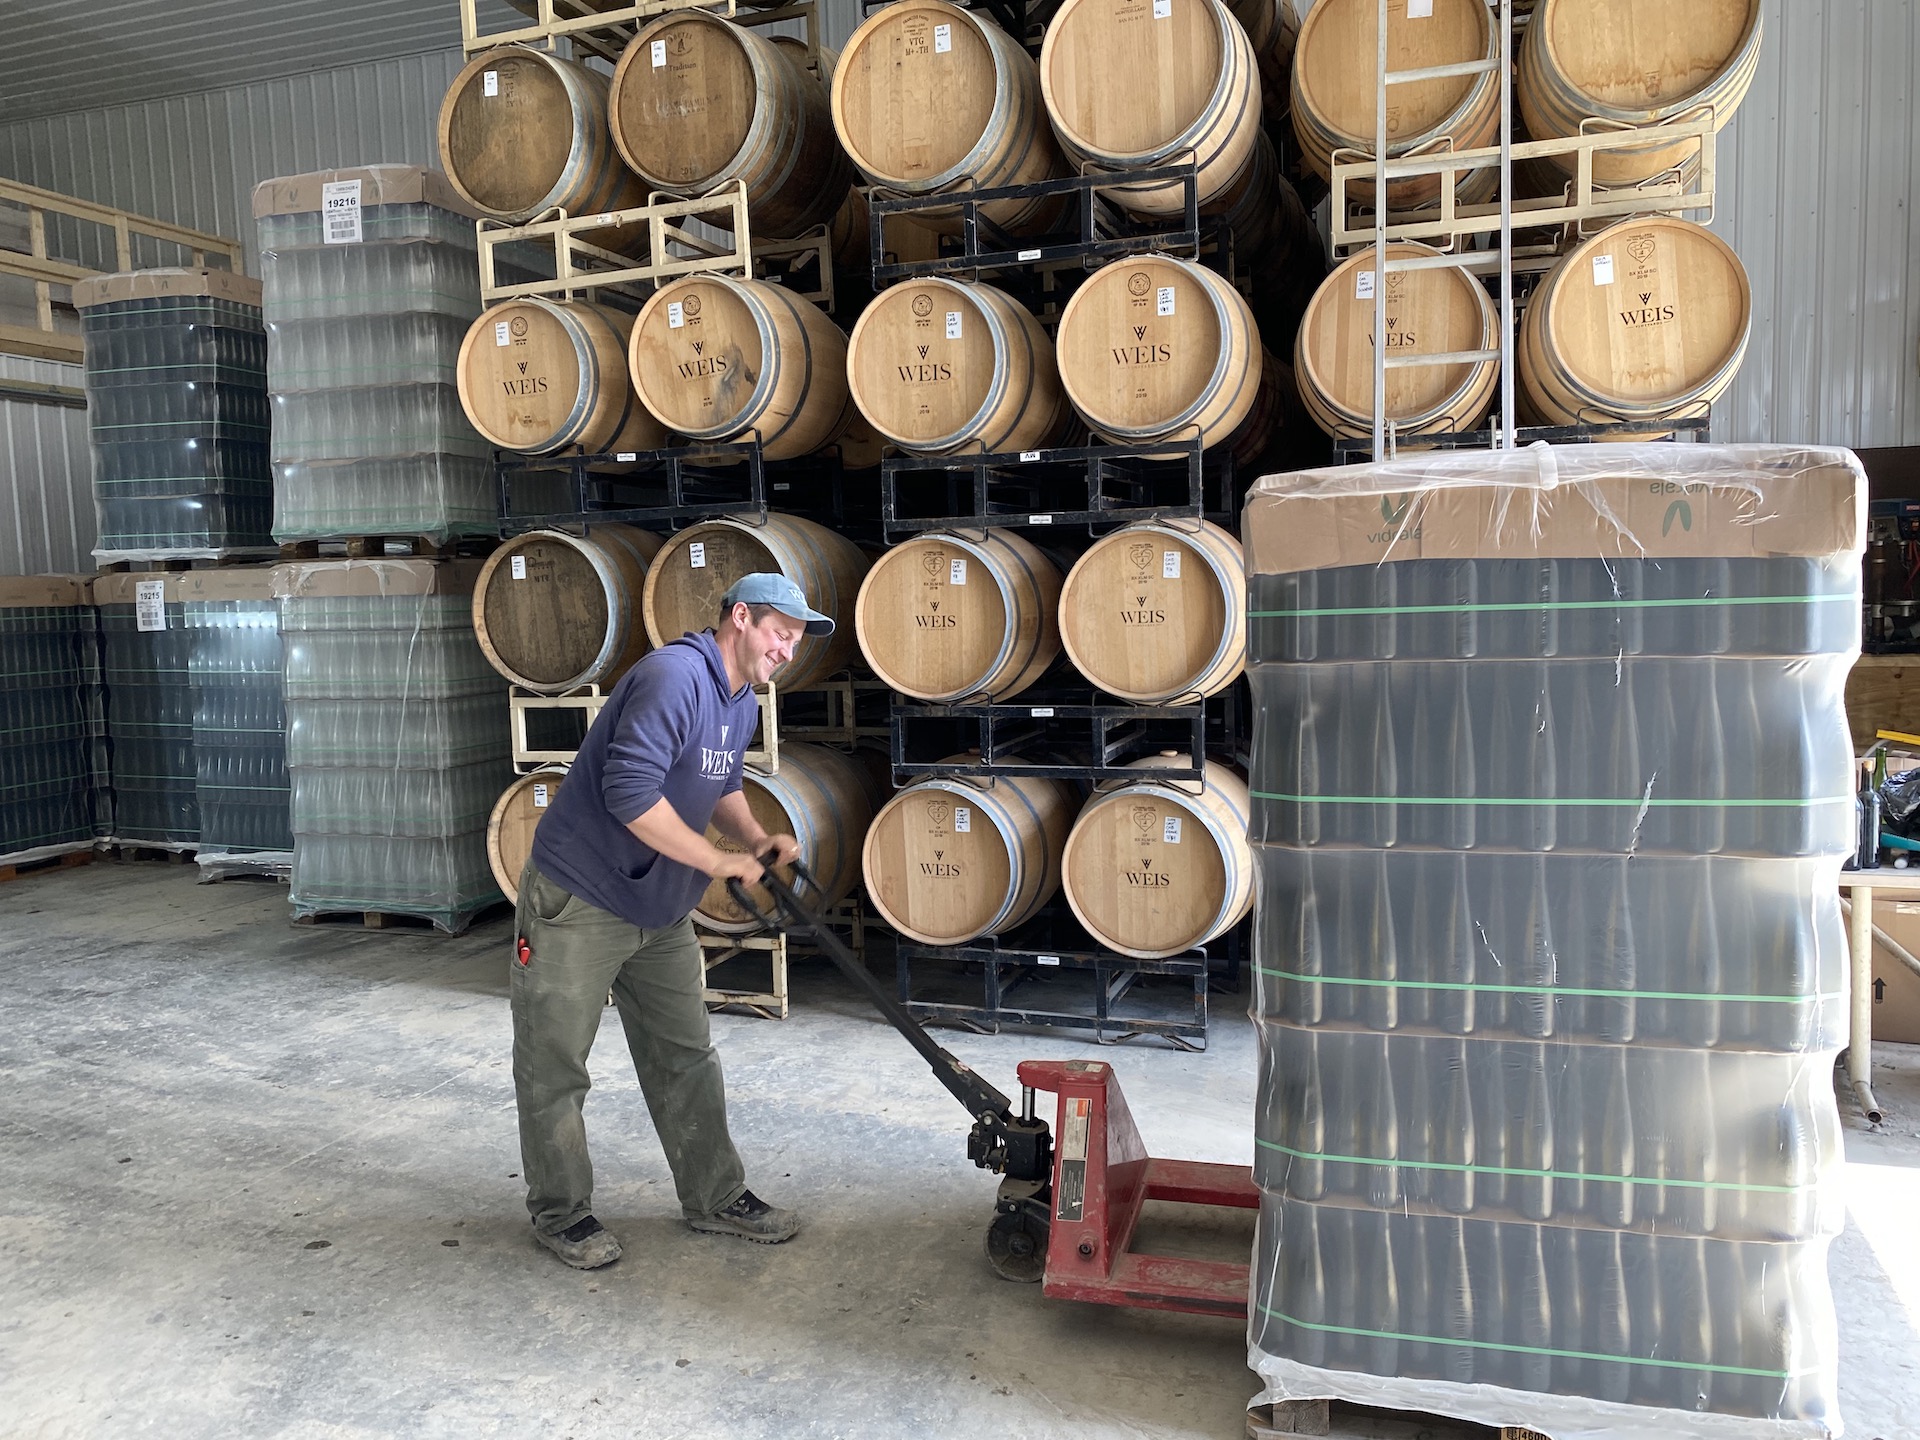 Peter Weis using a pallet jack to move pallets of glass in production facility.  Behind him are stacked wine barrels. 